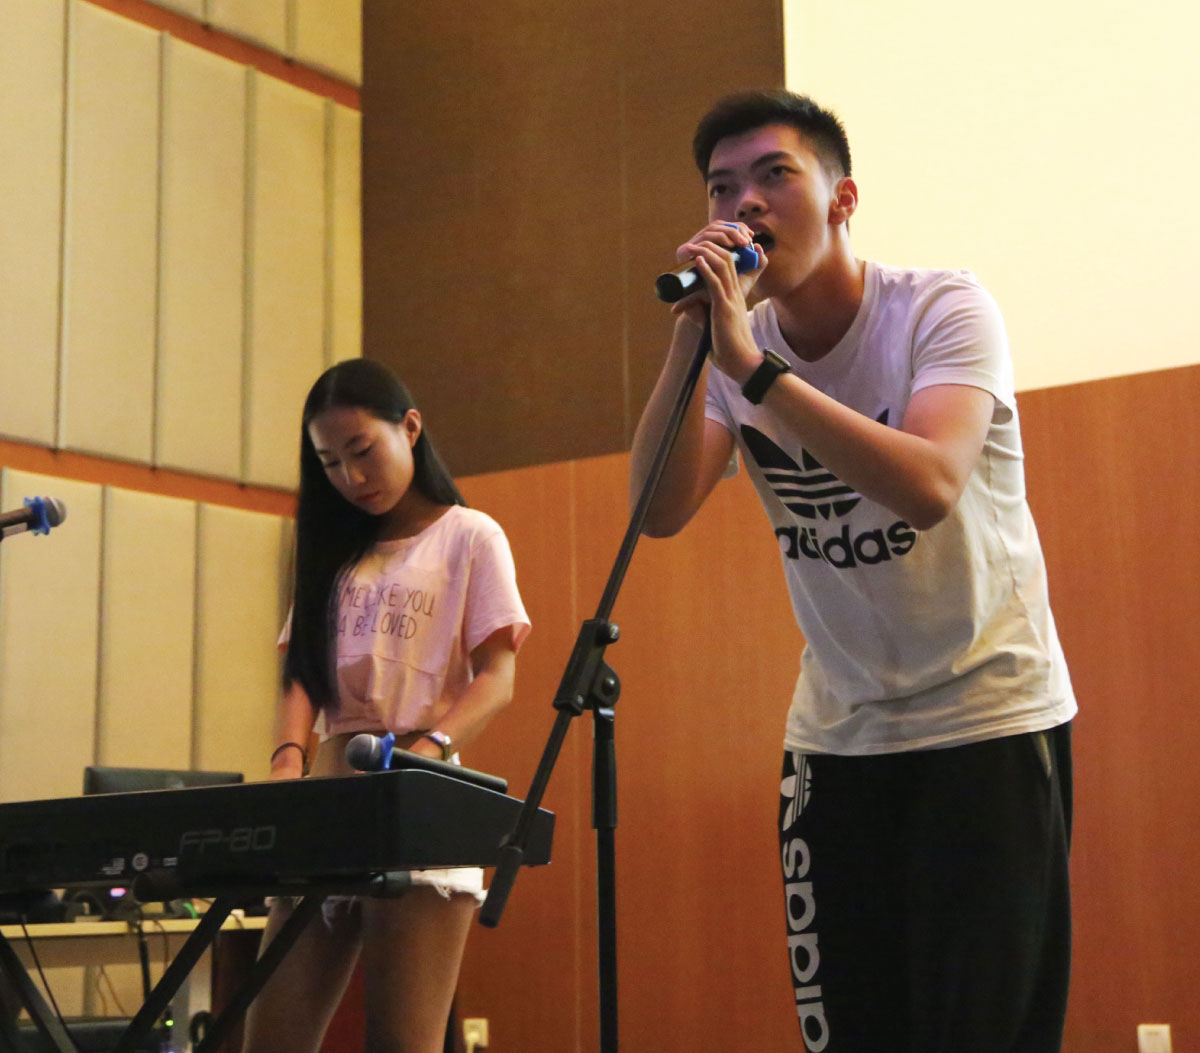 A student singing on stage, while another student plays an instrument